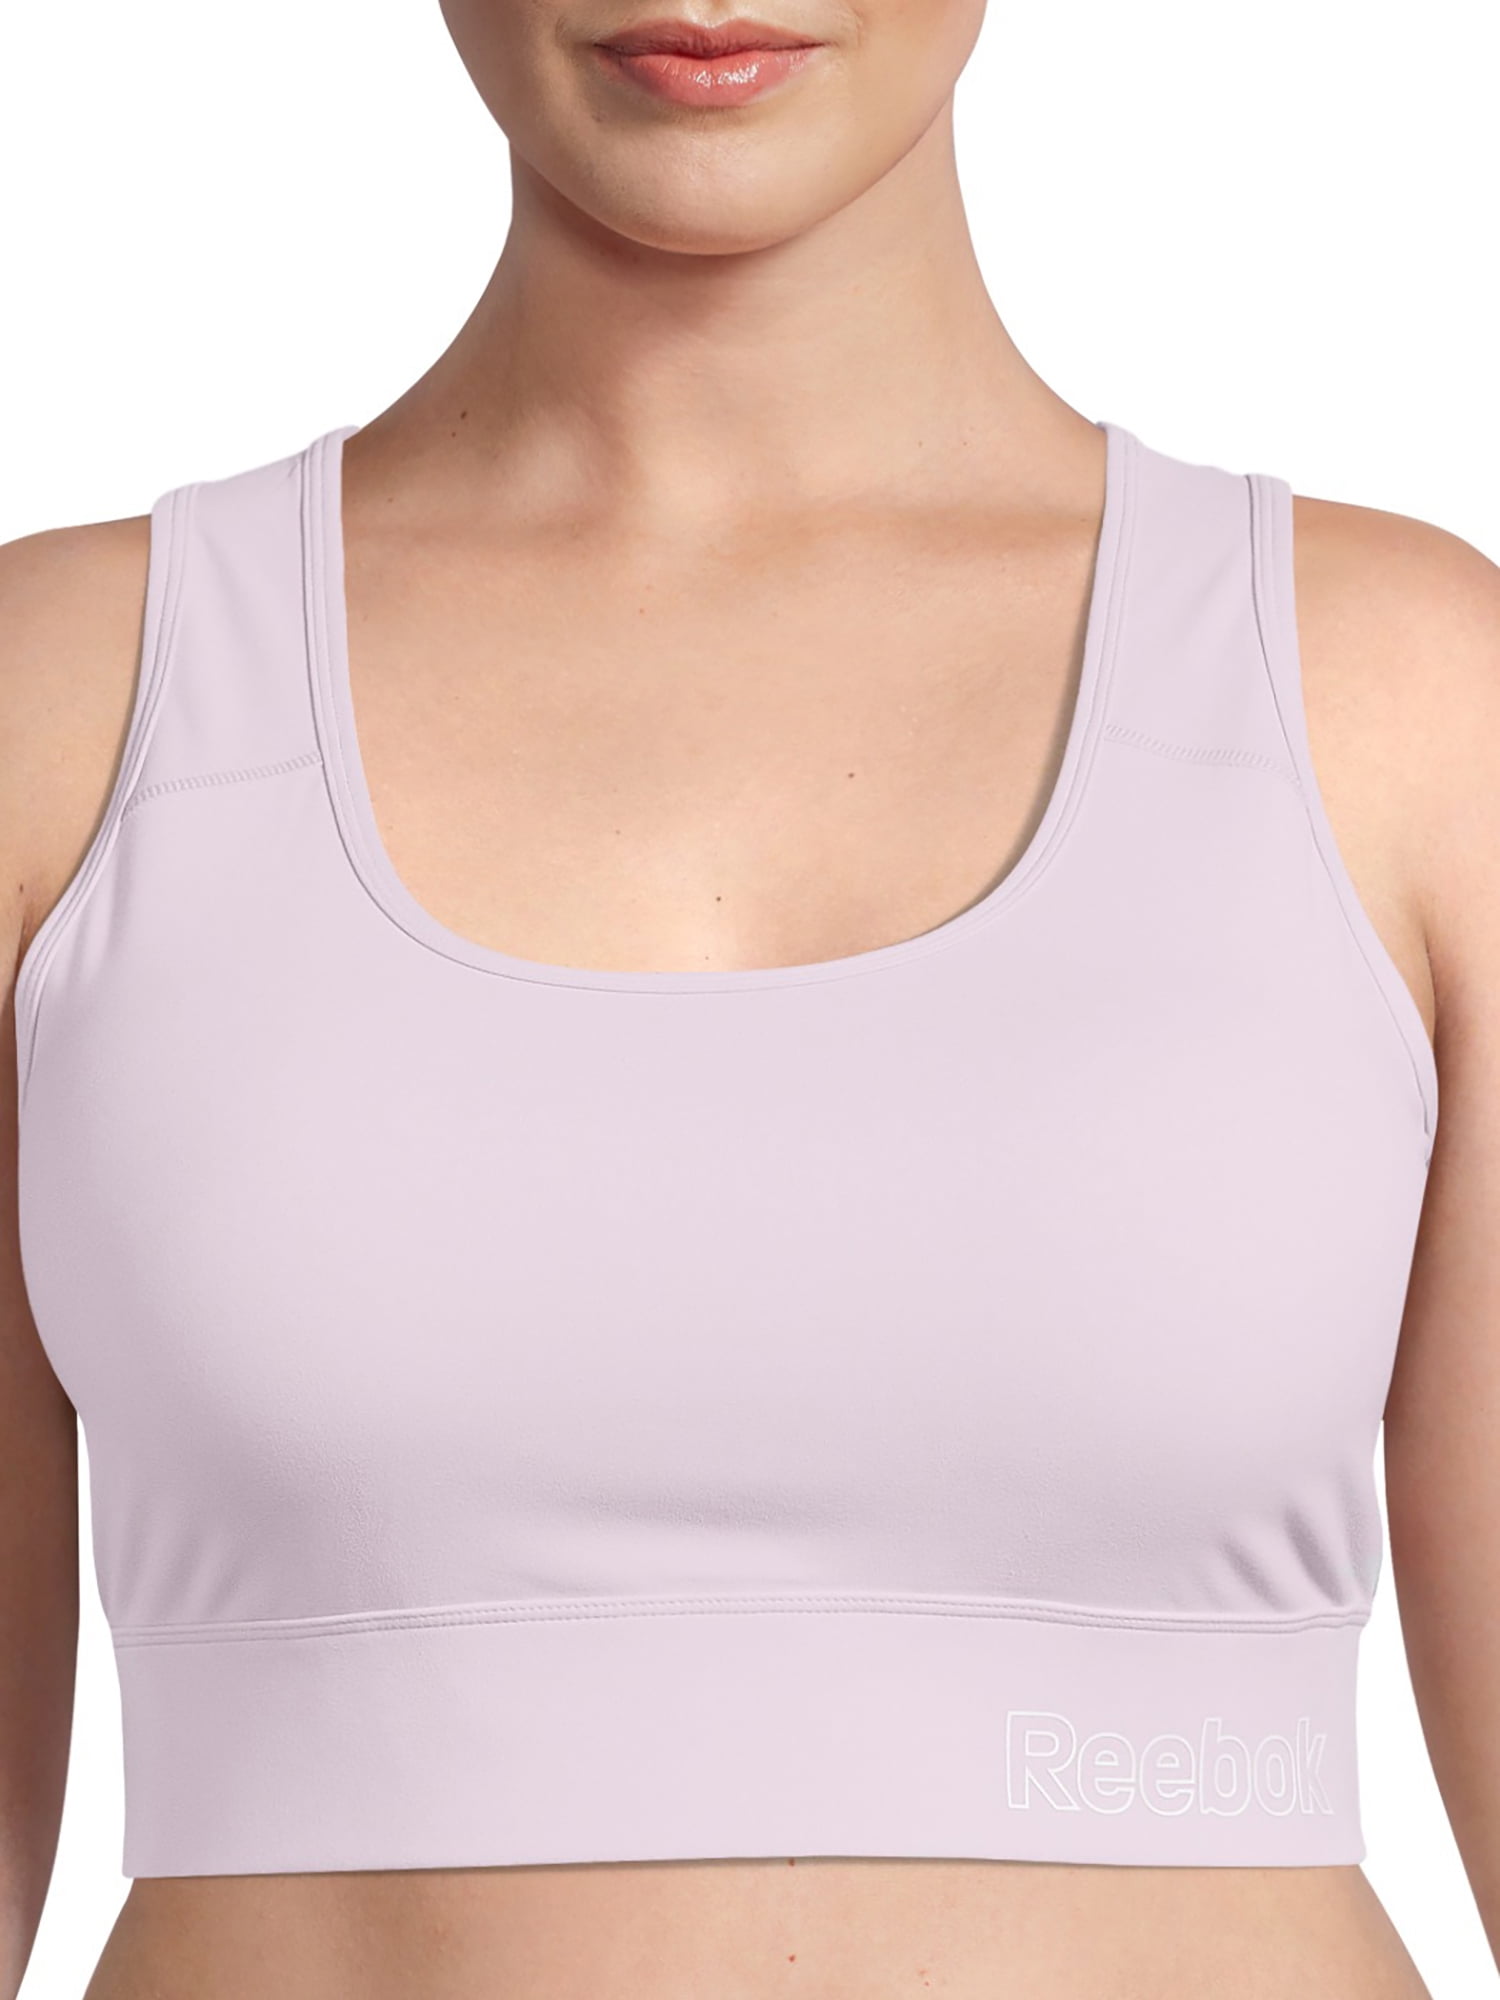 Reebok Women's Plus Size Essential Sports Bra with Back Pocket and